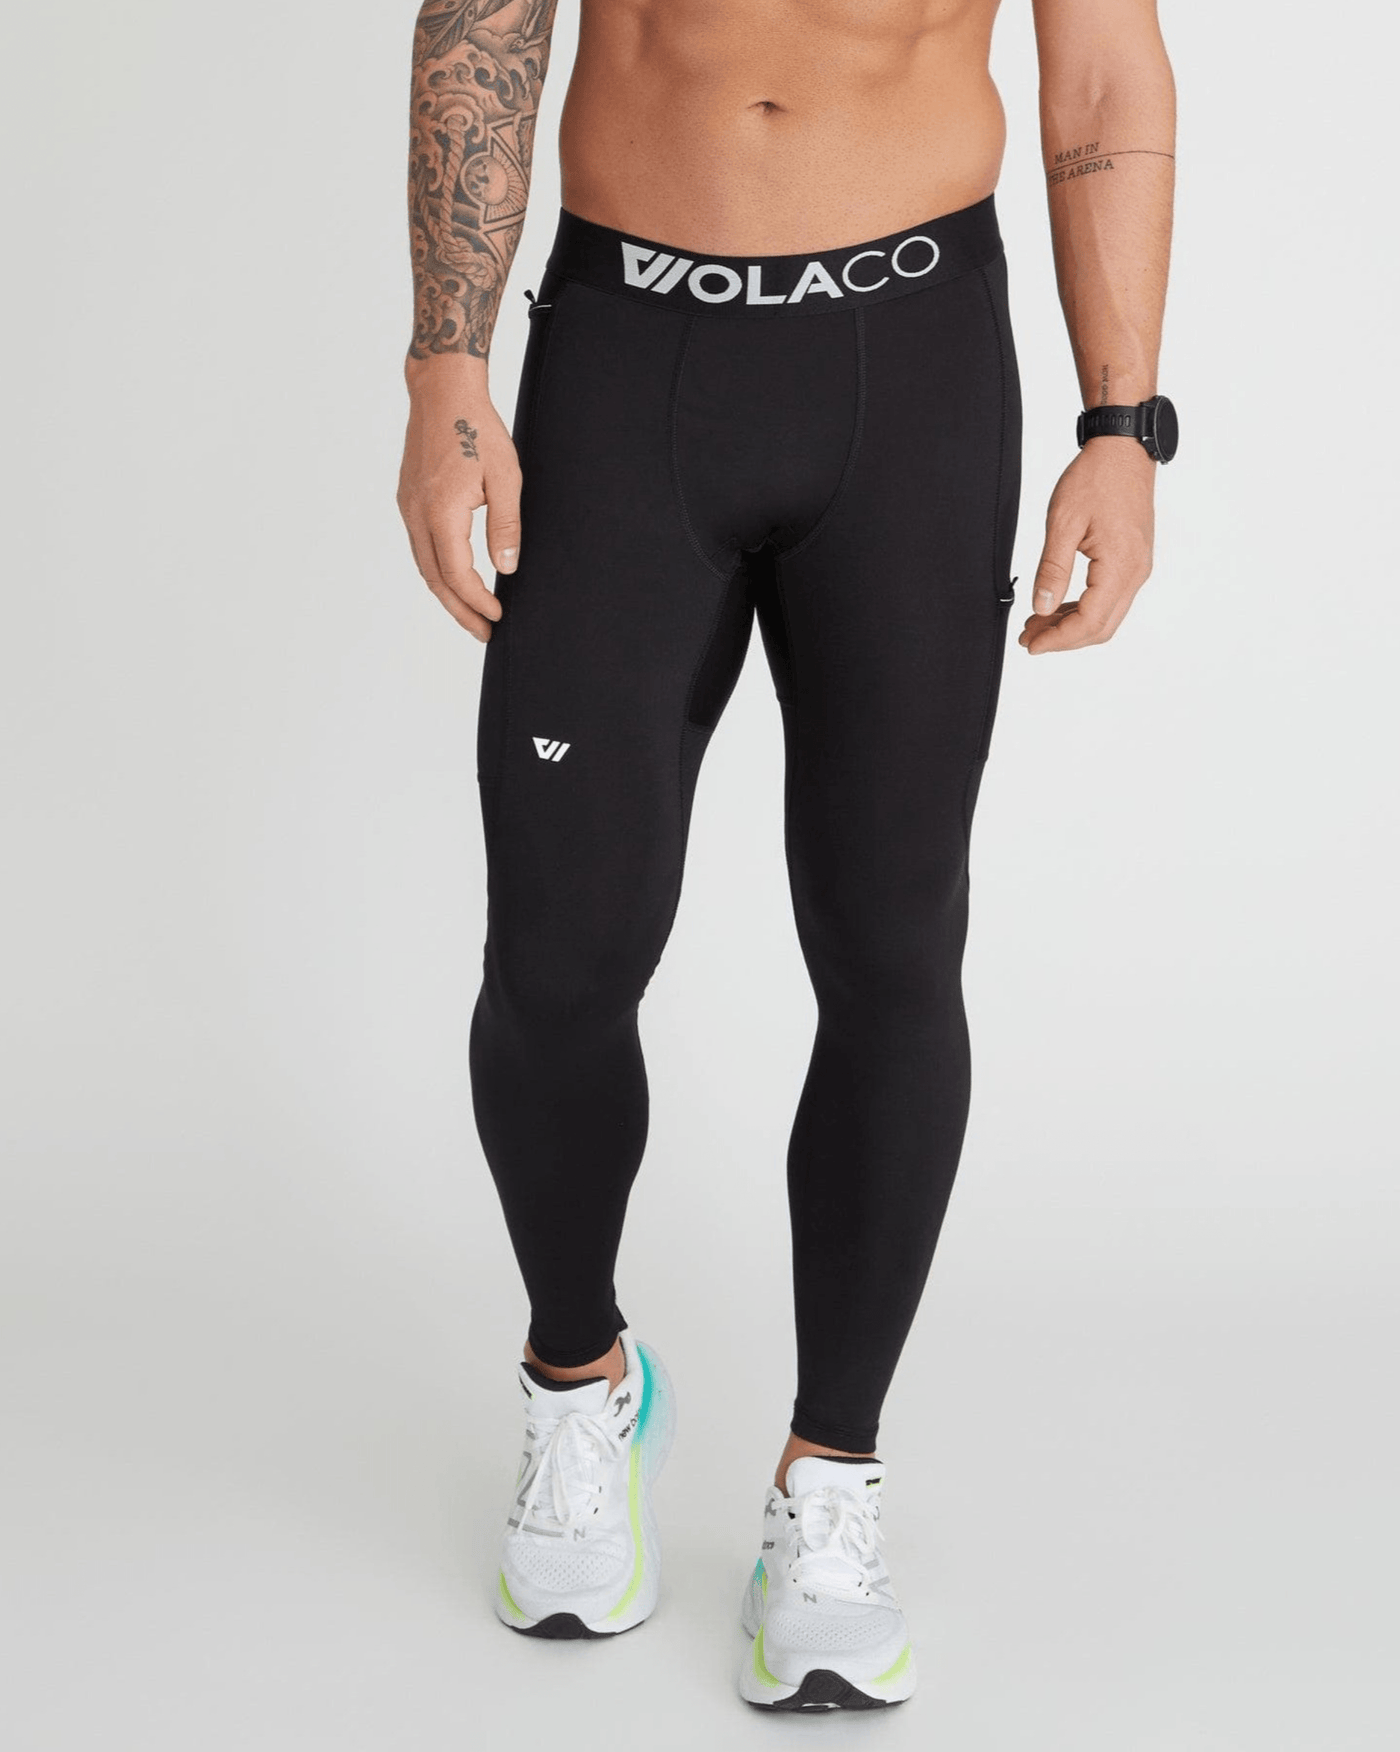 Mens Compression Leggings, TechPackTemplate